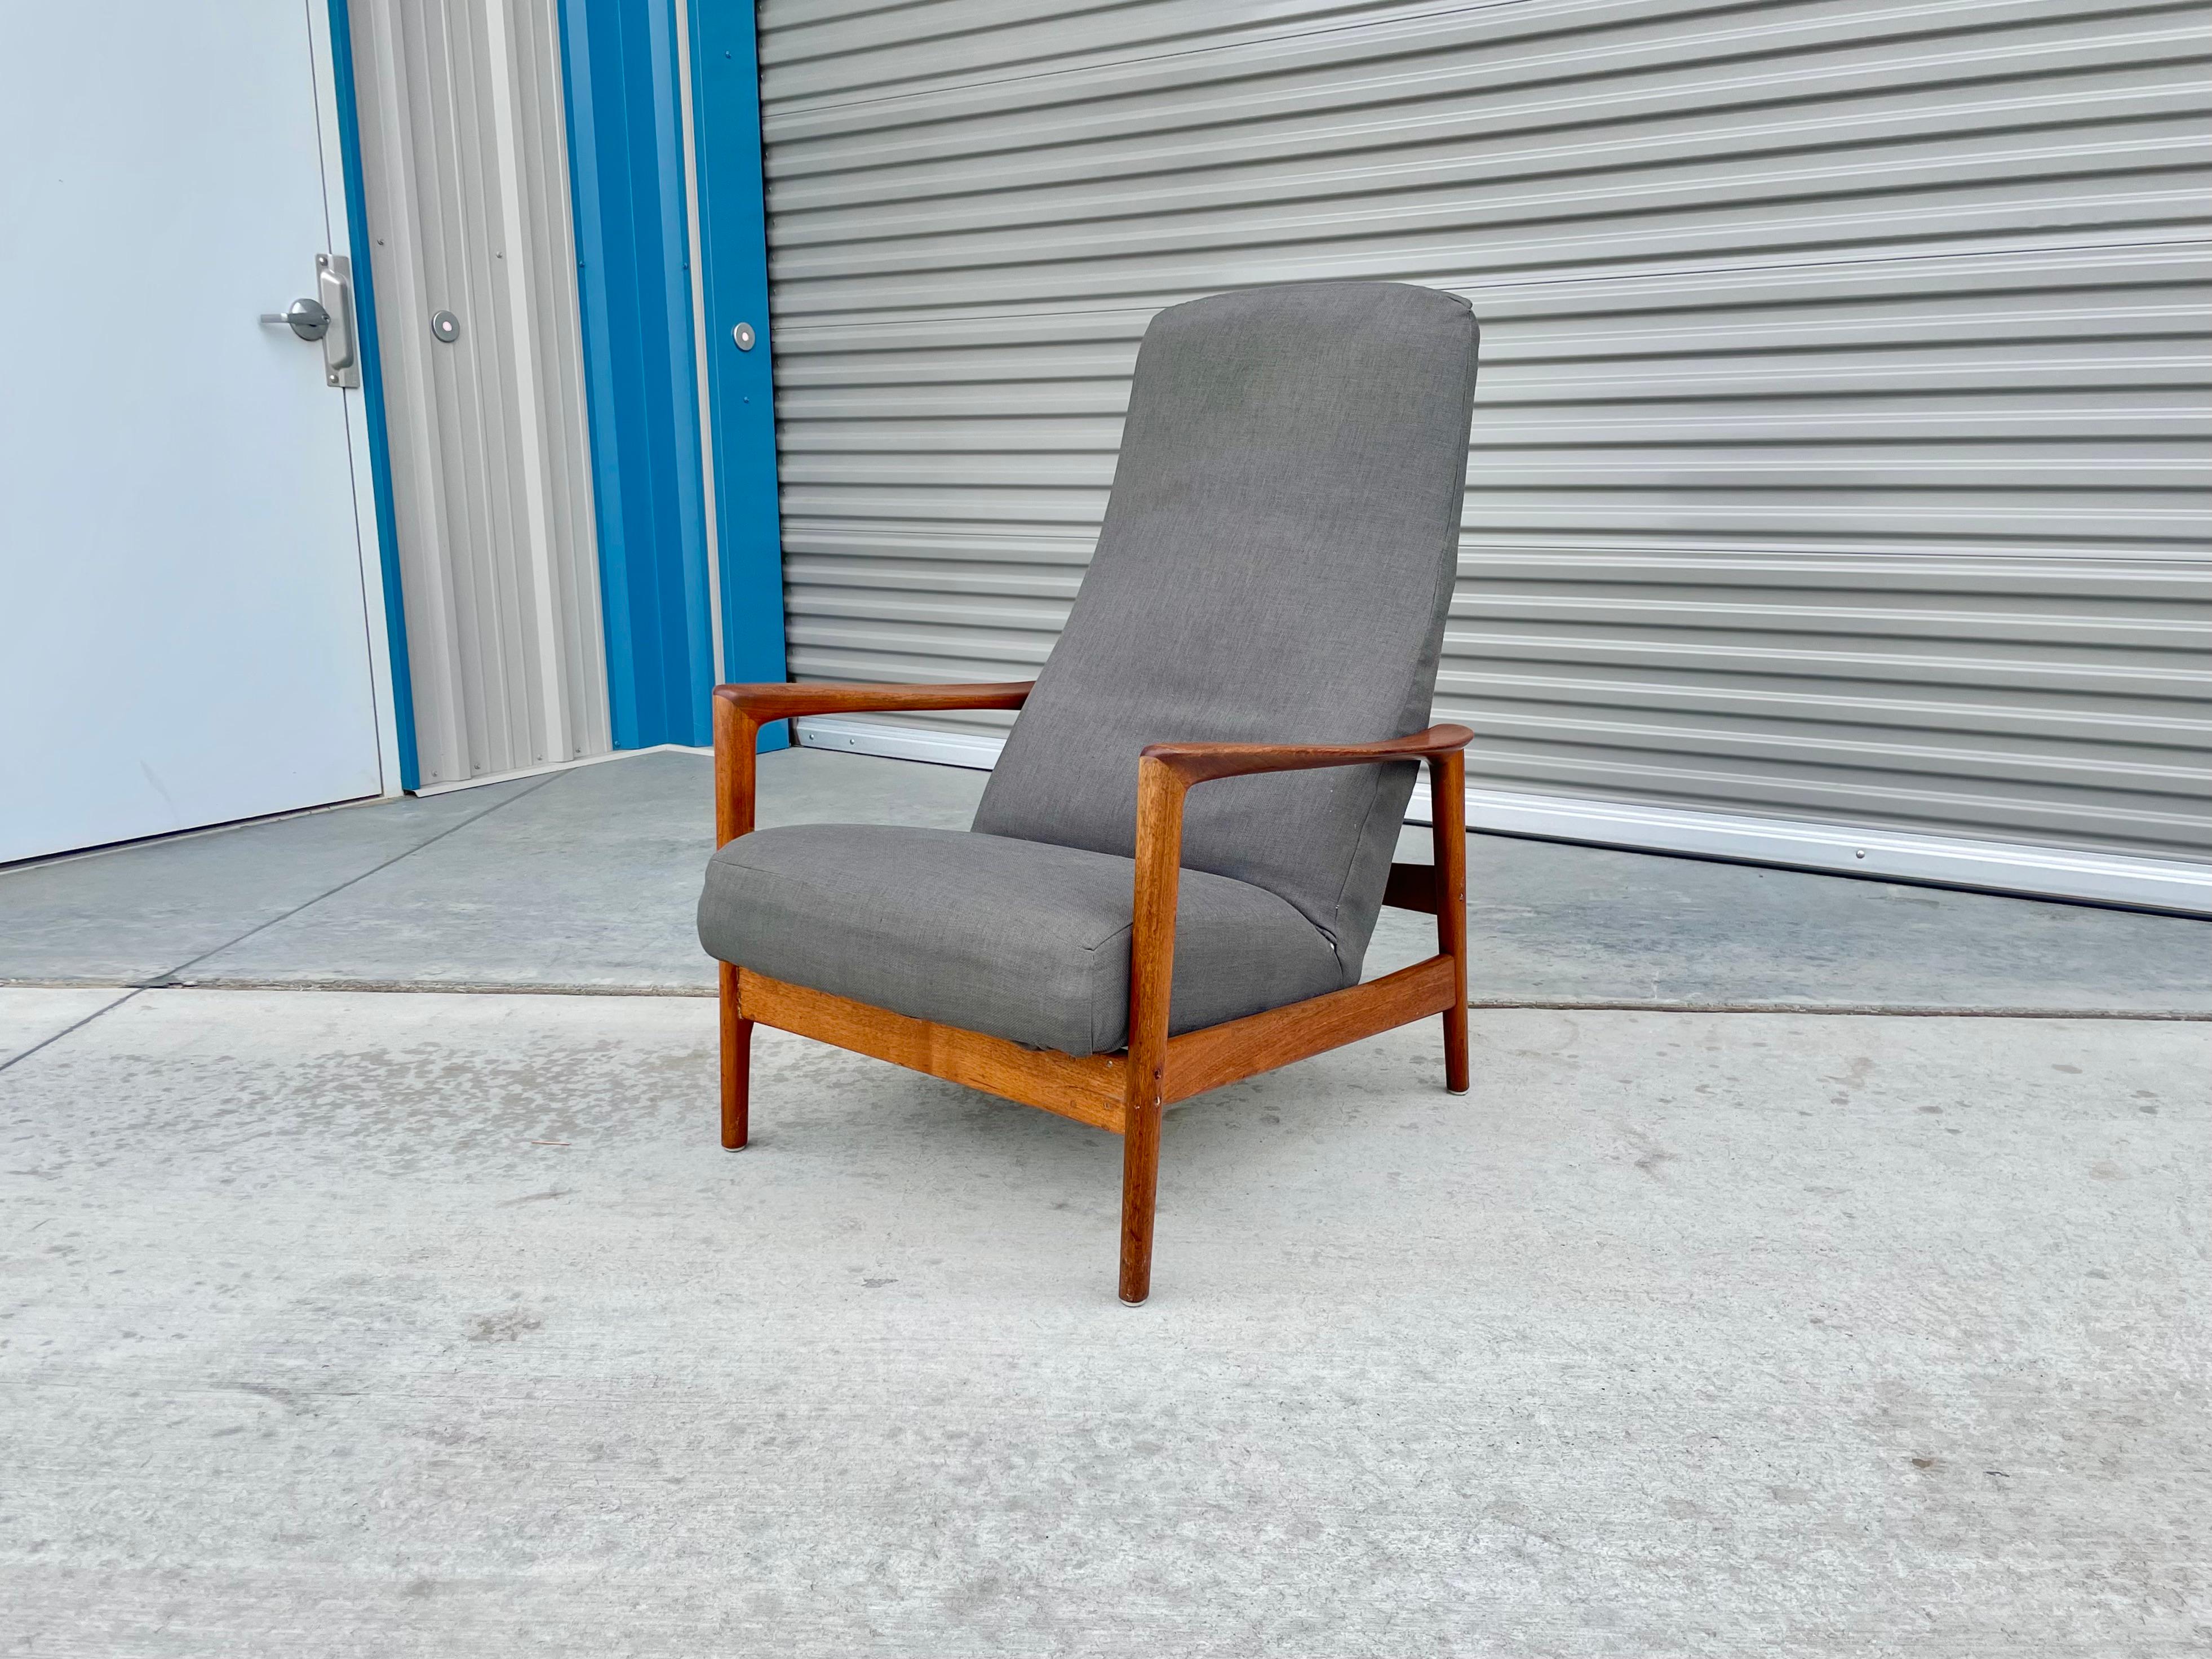 This mid-century walnut recliner was designed by Folke Ohlsson and manufactured by Dux in Sweden circa 1960s. This fantastic recliner features a walnut frame with gray upholstery. The chair also features an adjustable tilt mechanism that can lock